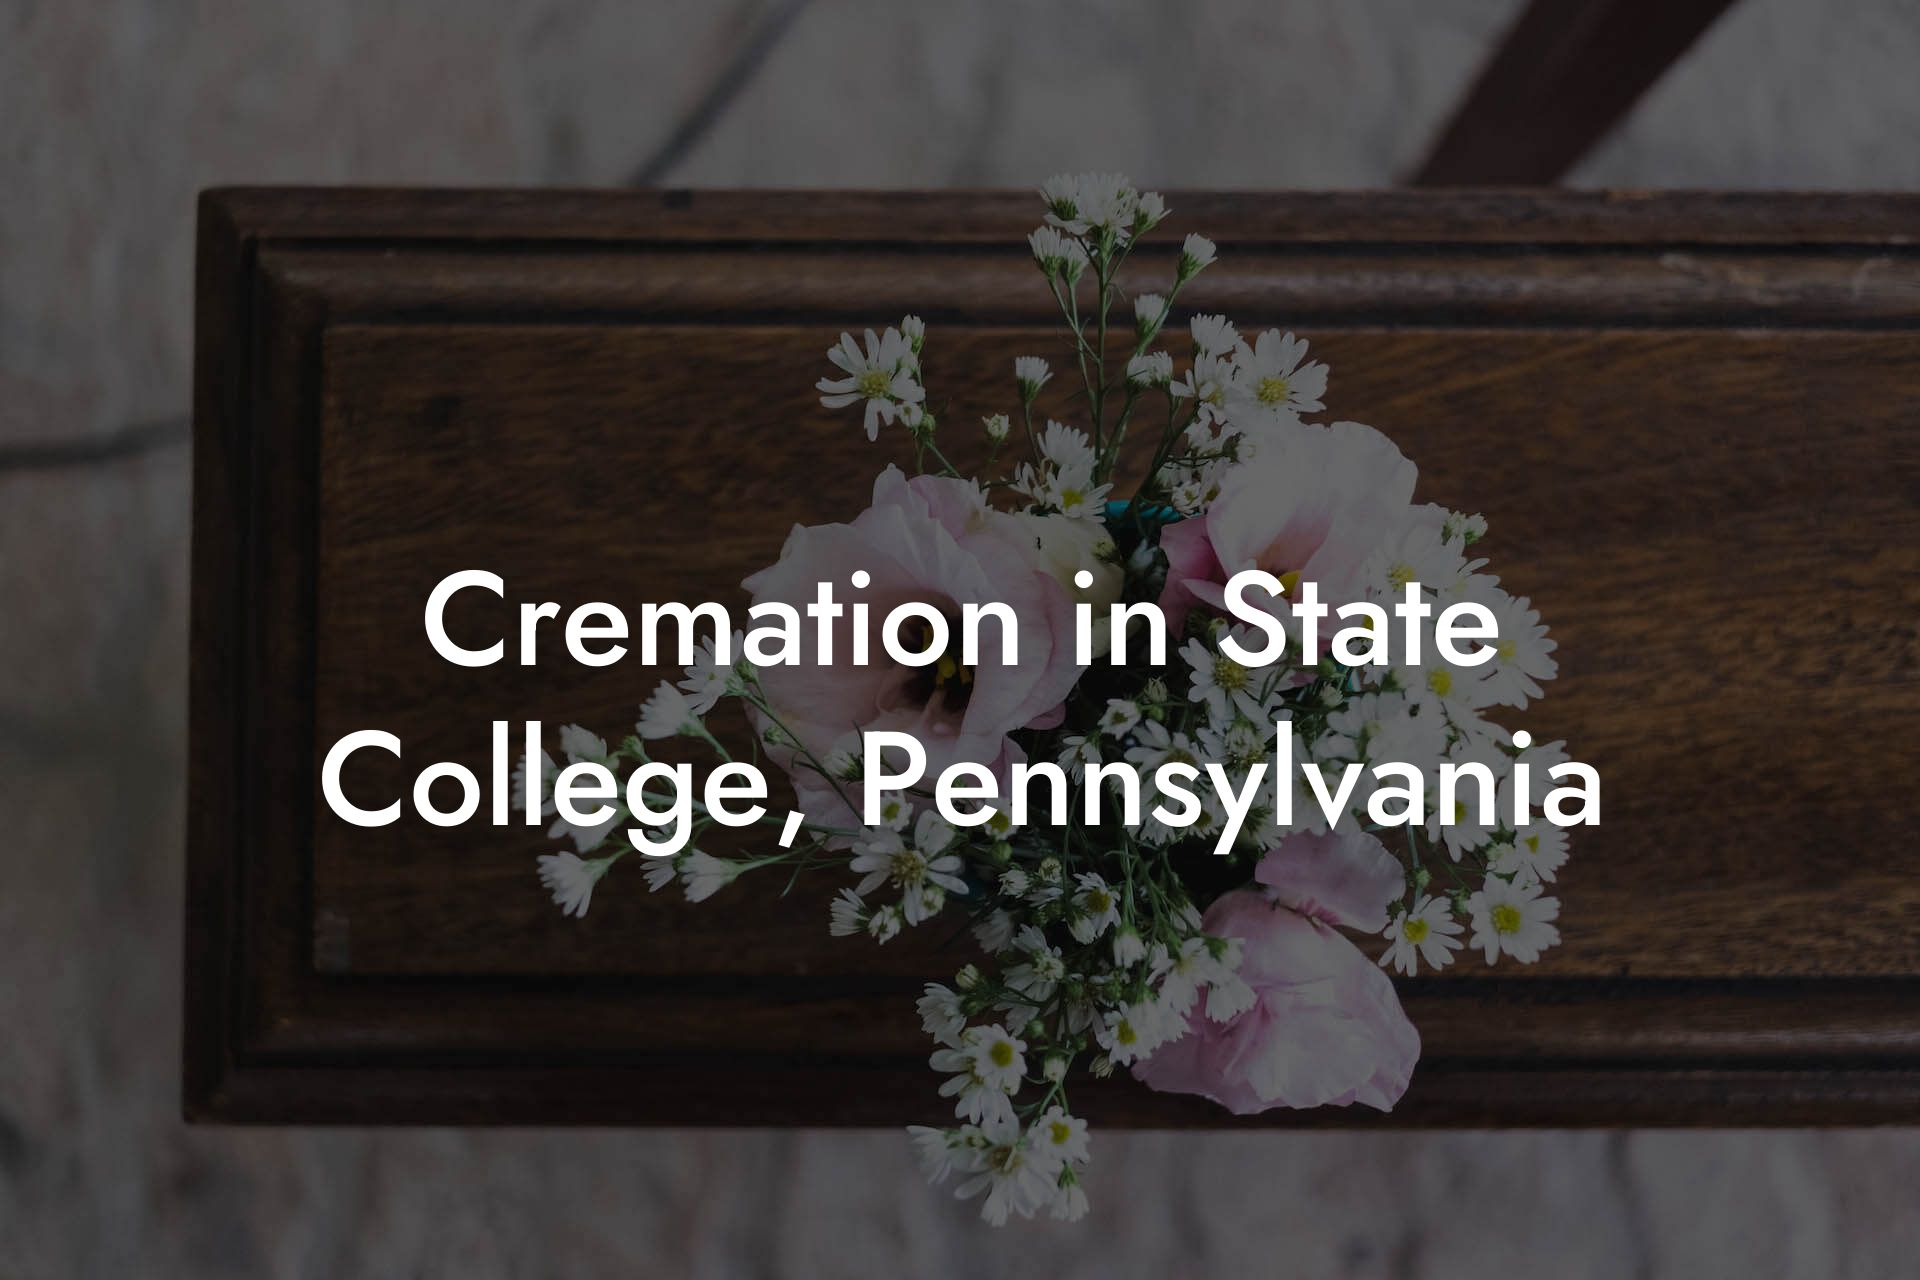 Cremation in State College, Pennsylvania